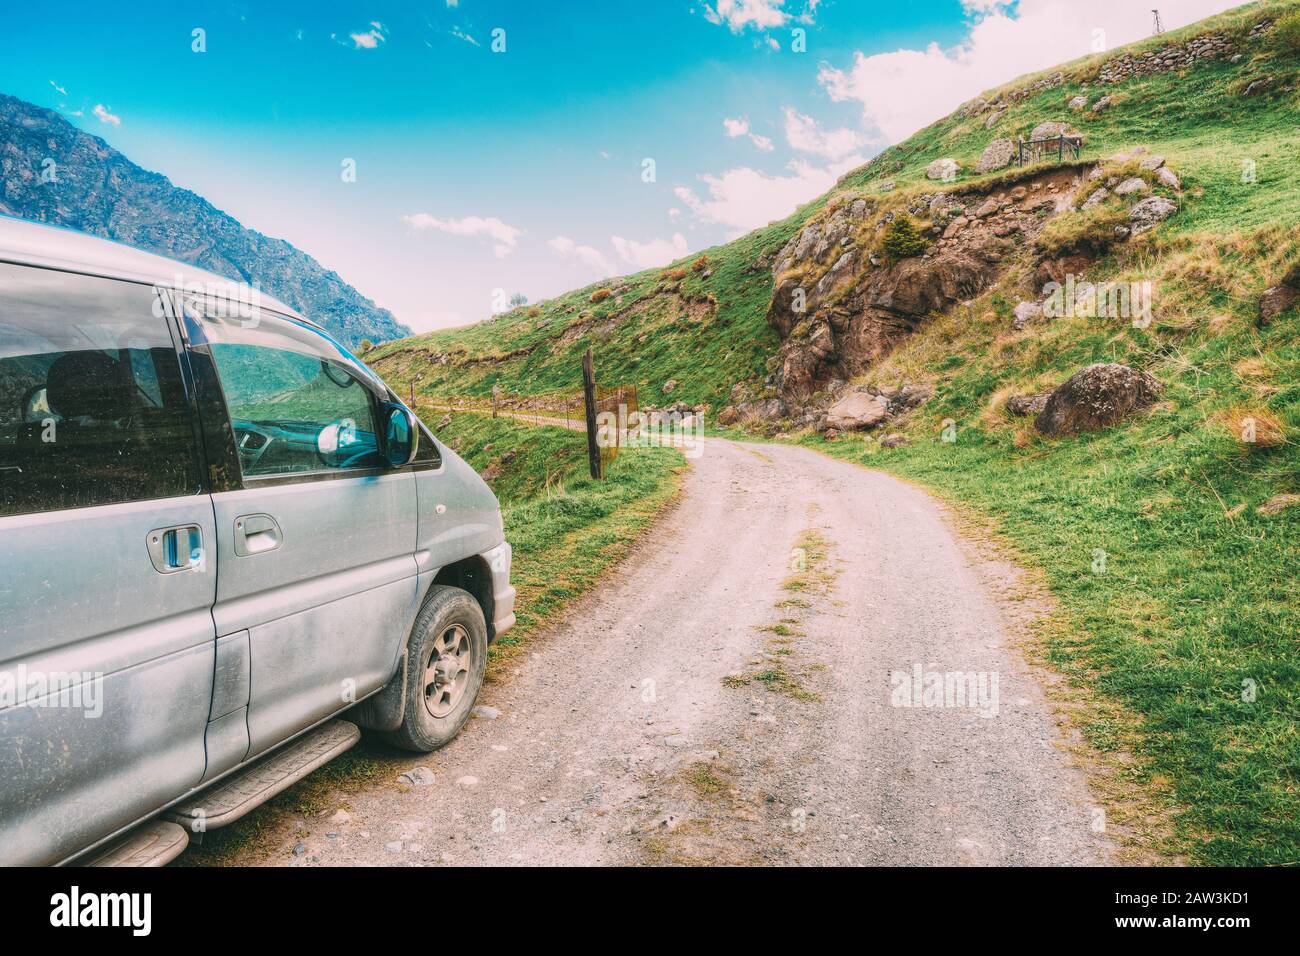 Georgia. Car SUV On Off Road. Freedom And Driving Concept. Vehicle On Country Road In Spring Or Summer Season. Stock Photo